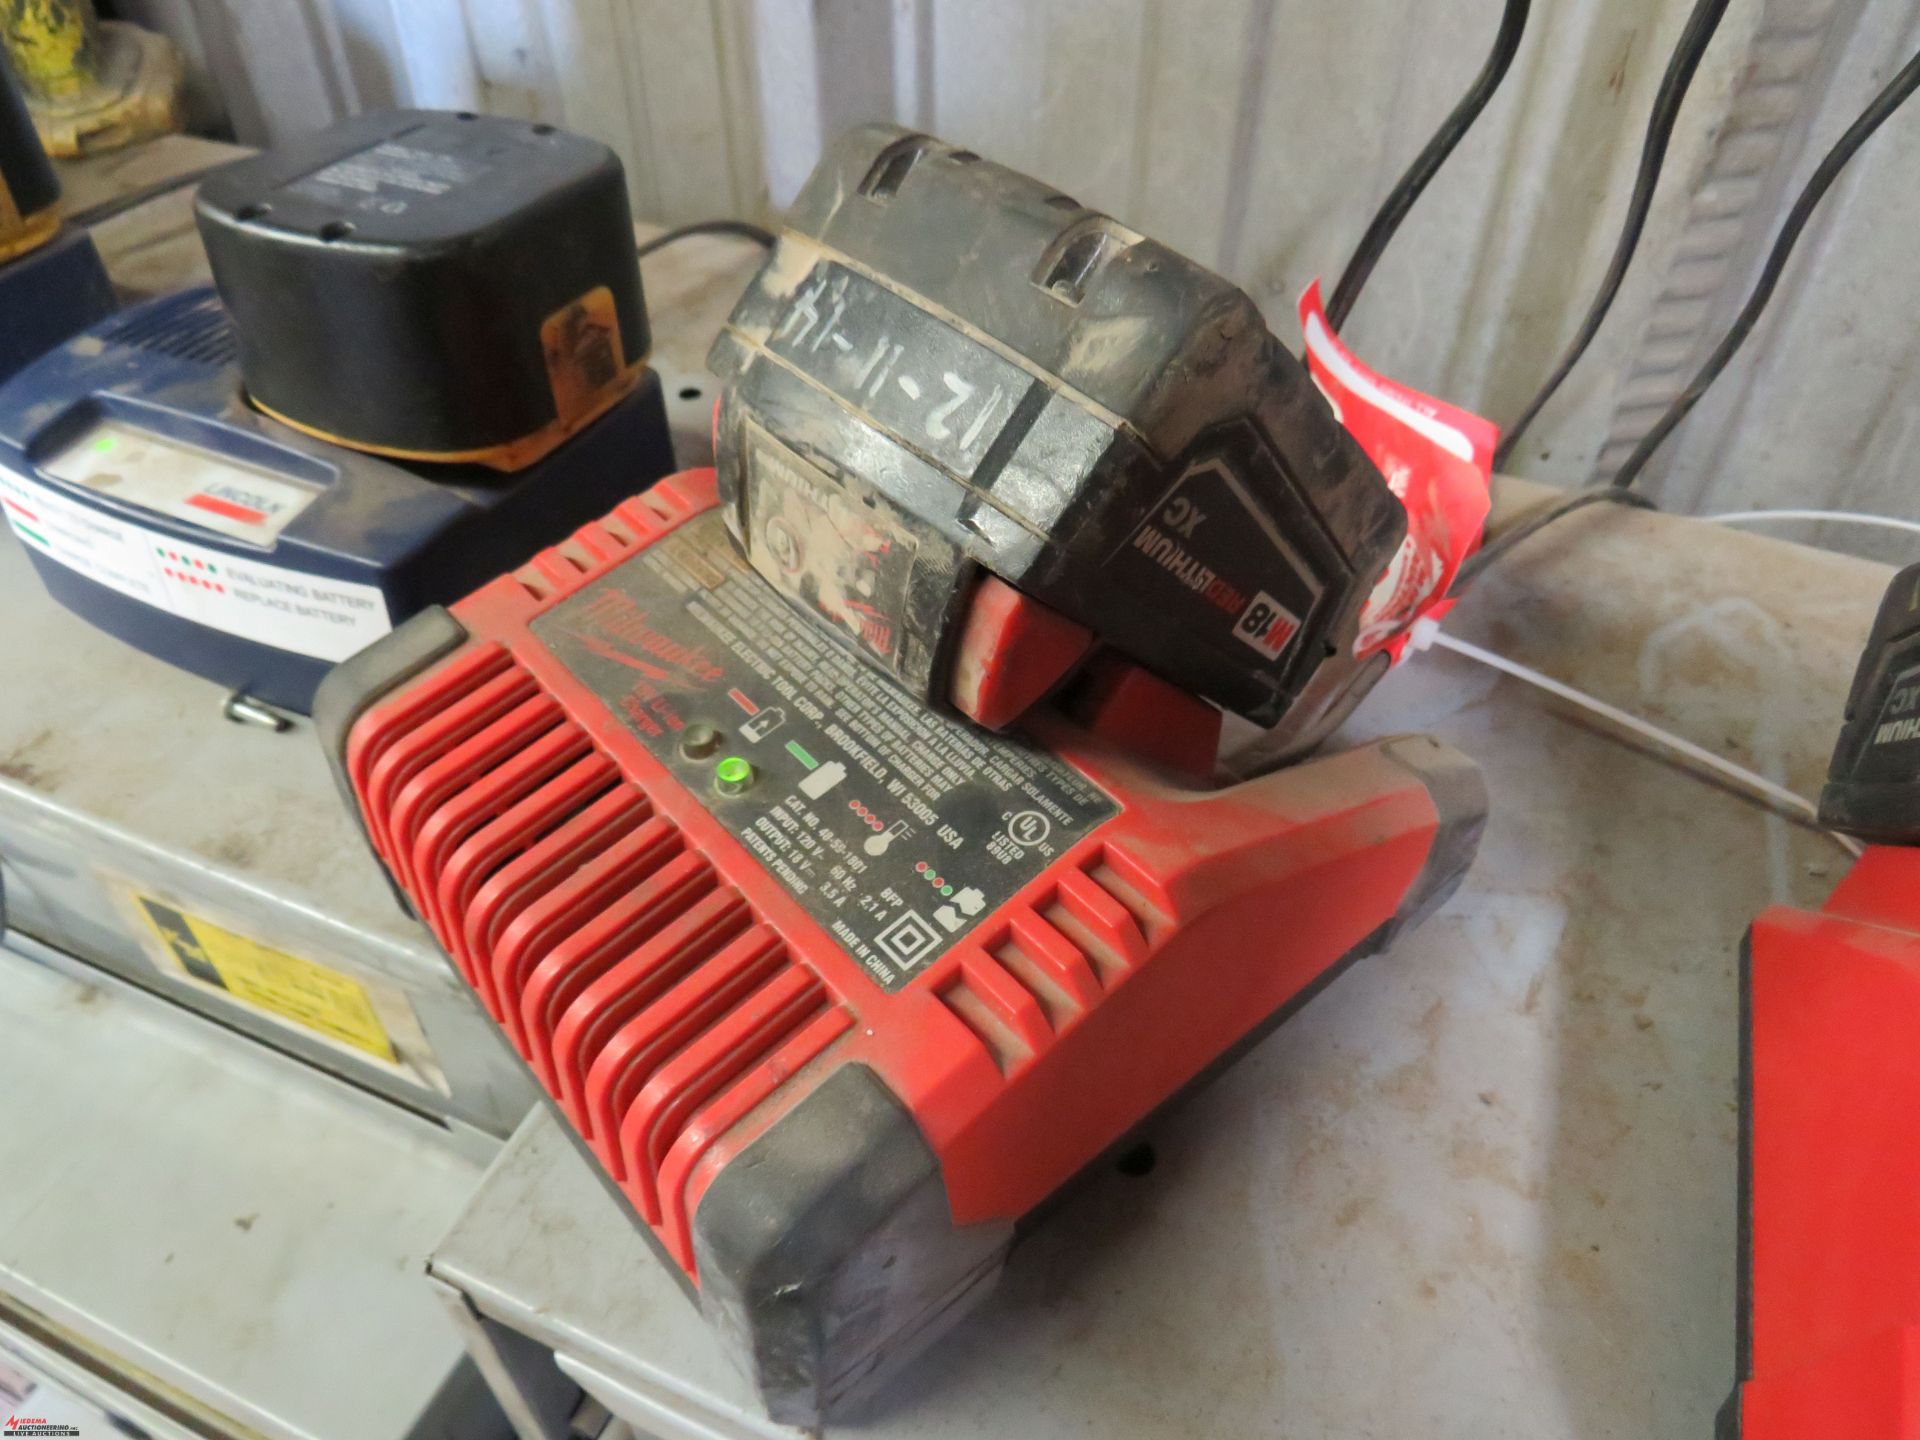 MILWAUKEE CORDLESS DRILLS (2), 18v, WITH CHARGER - Image 4 of 4